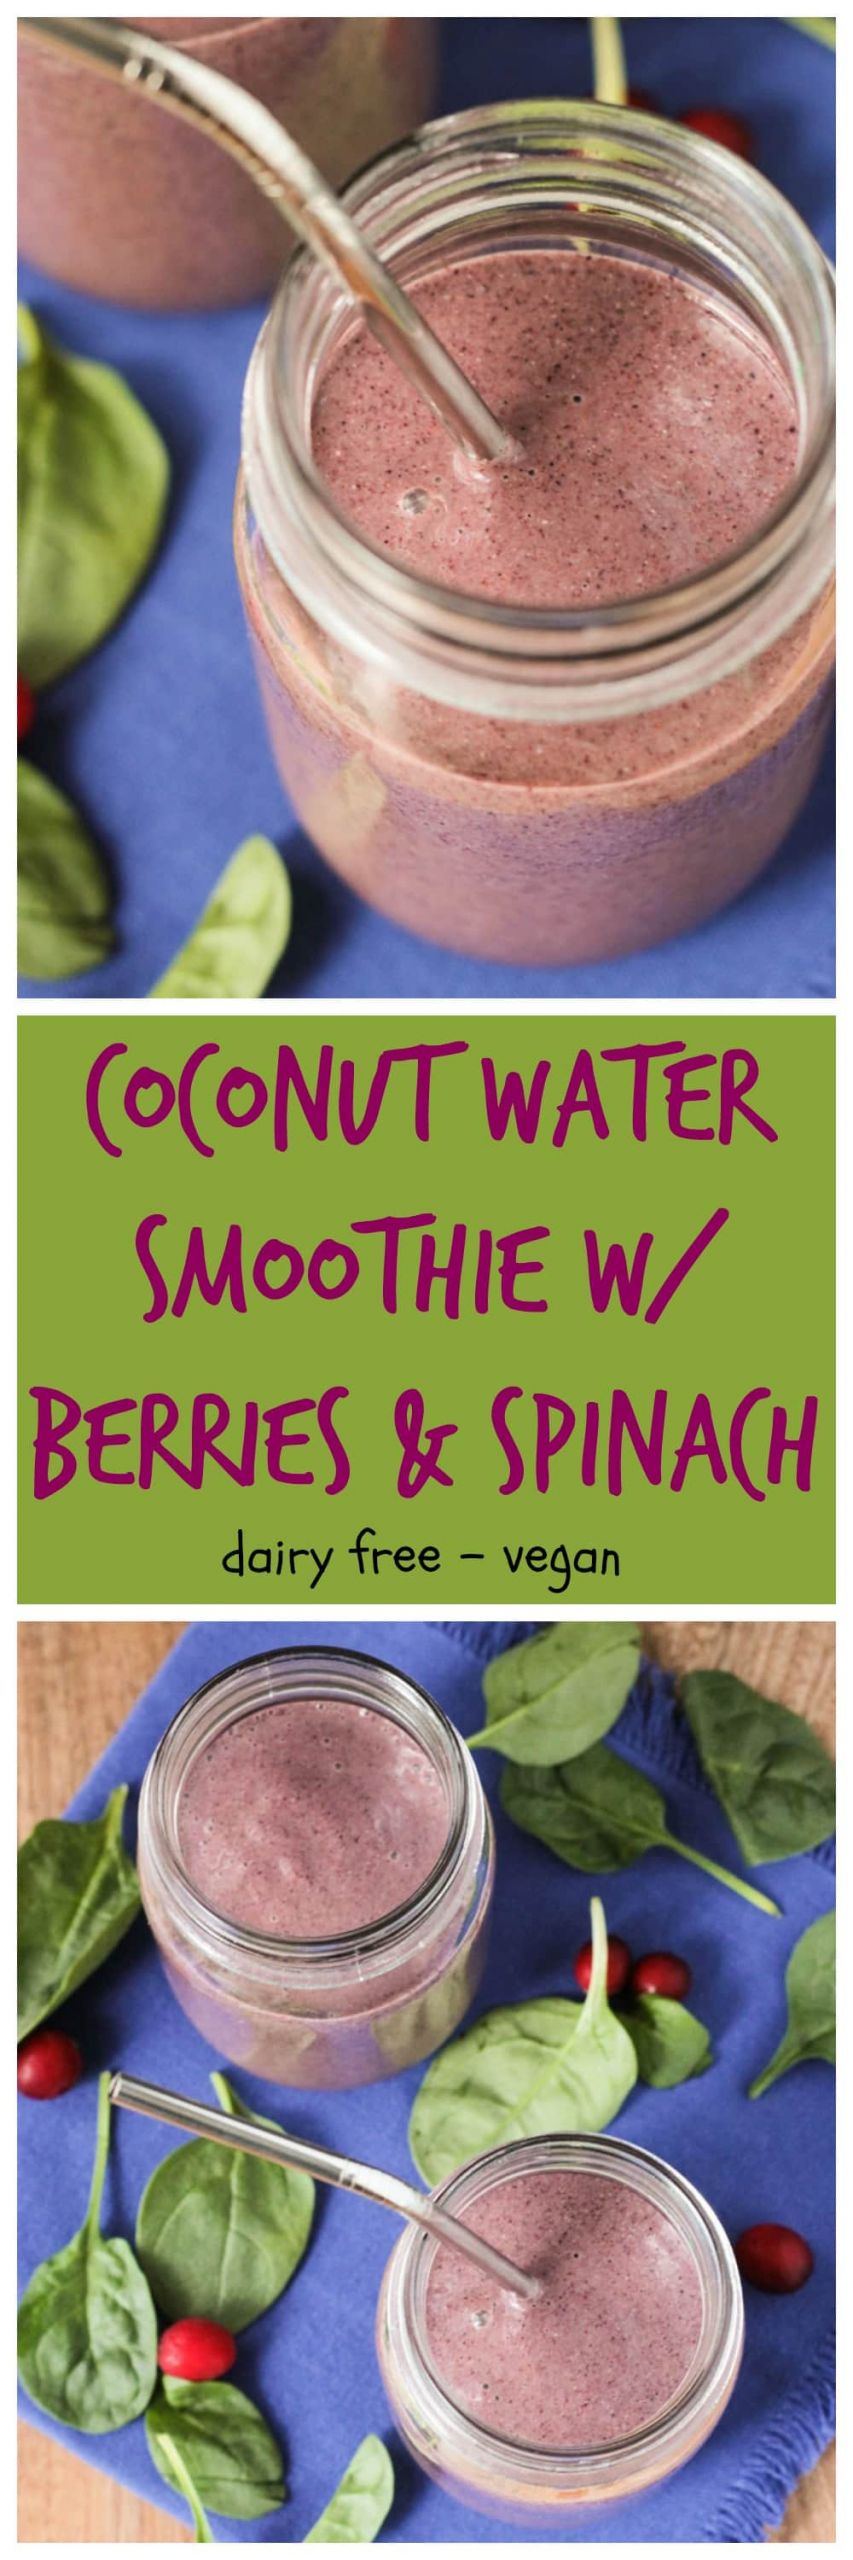 Coconut Water Smoothie Recipes
 Coconut Water Smoothie with Berries and Spinach Veggie